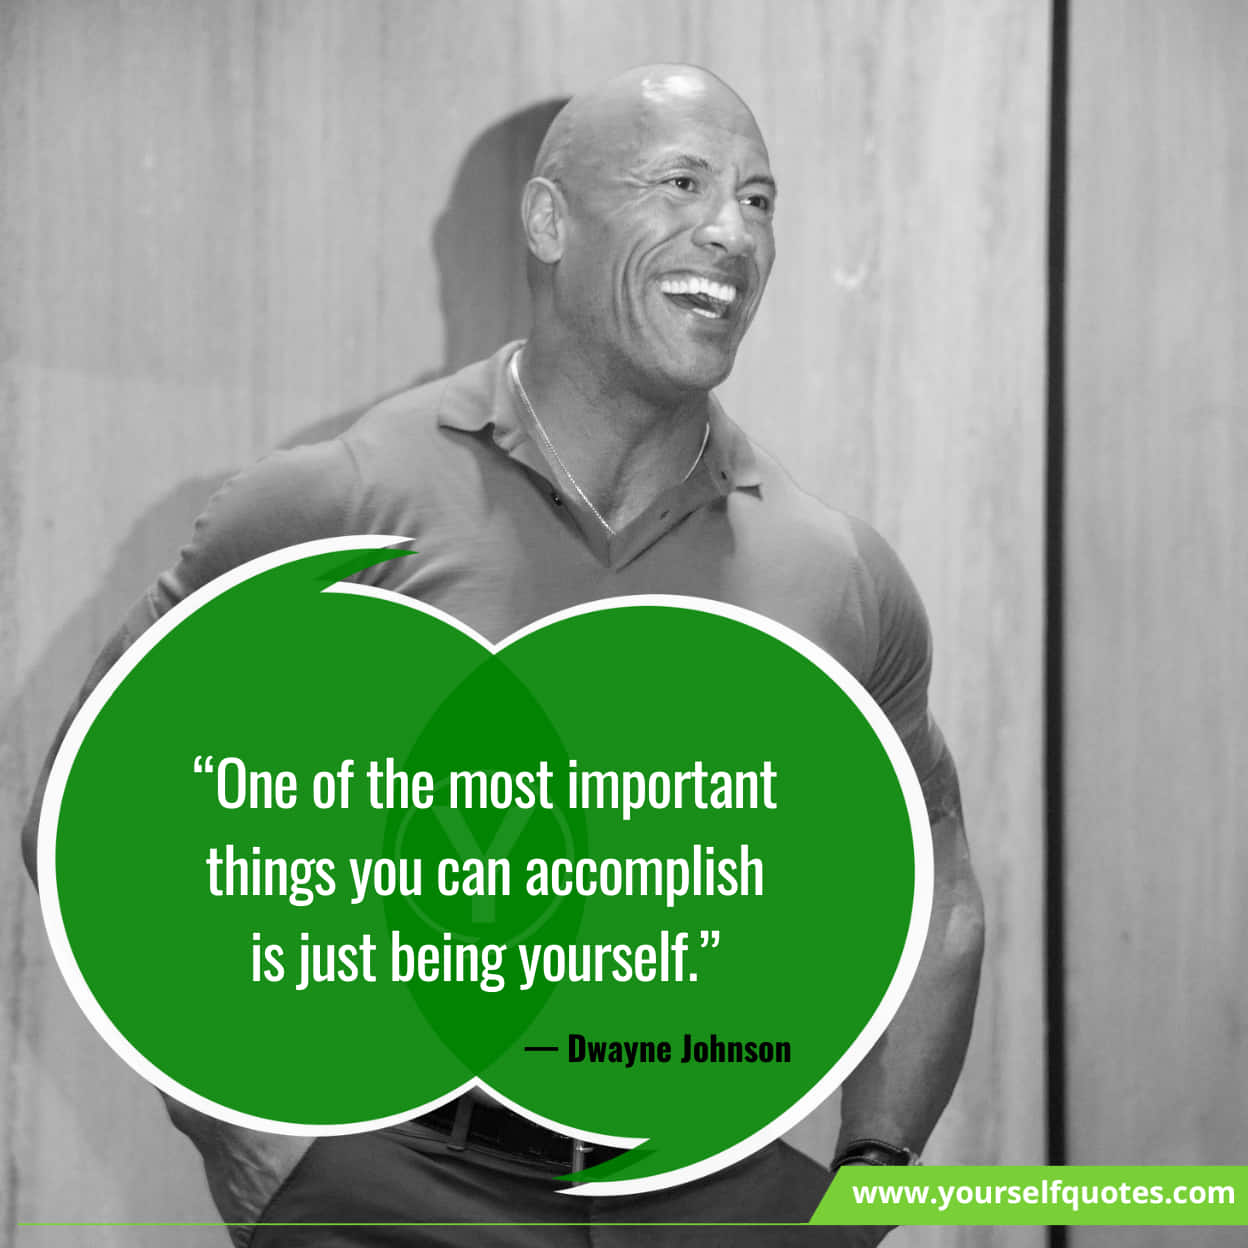 Dwayne Johnson Quotes For Life